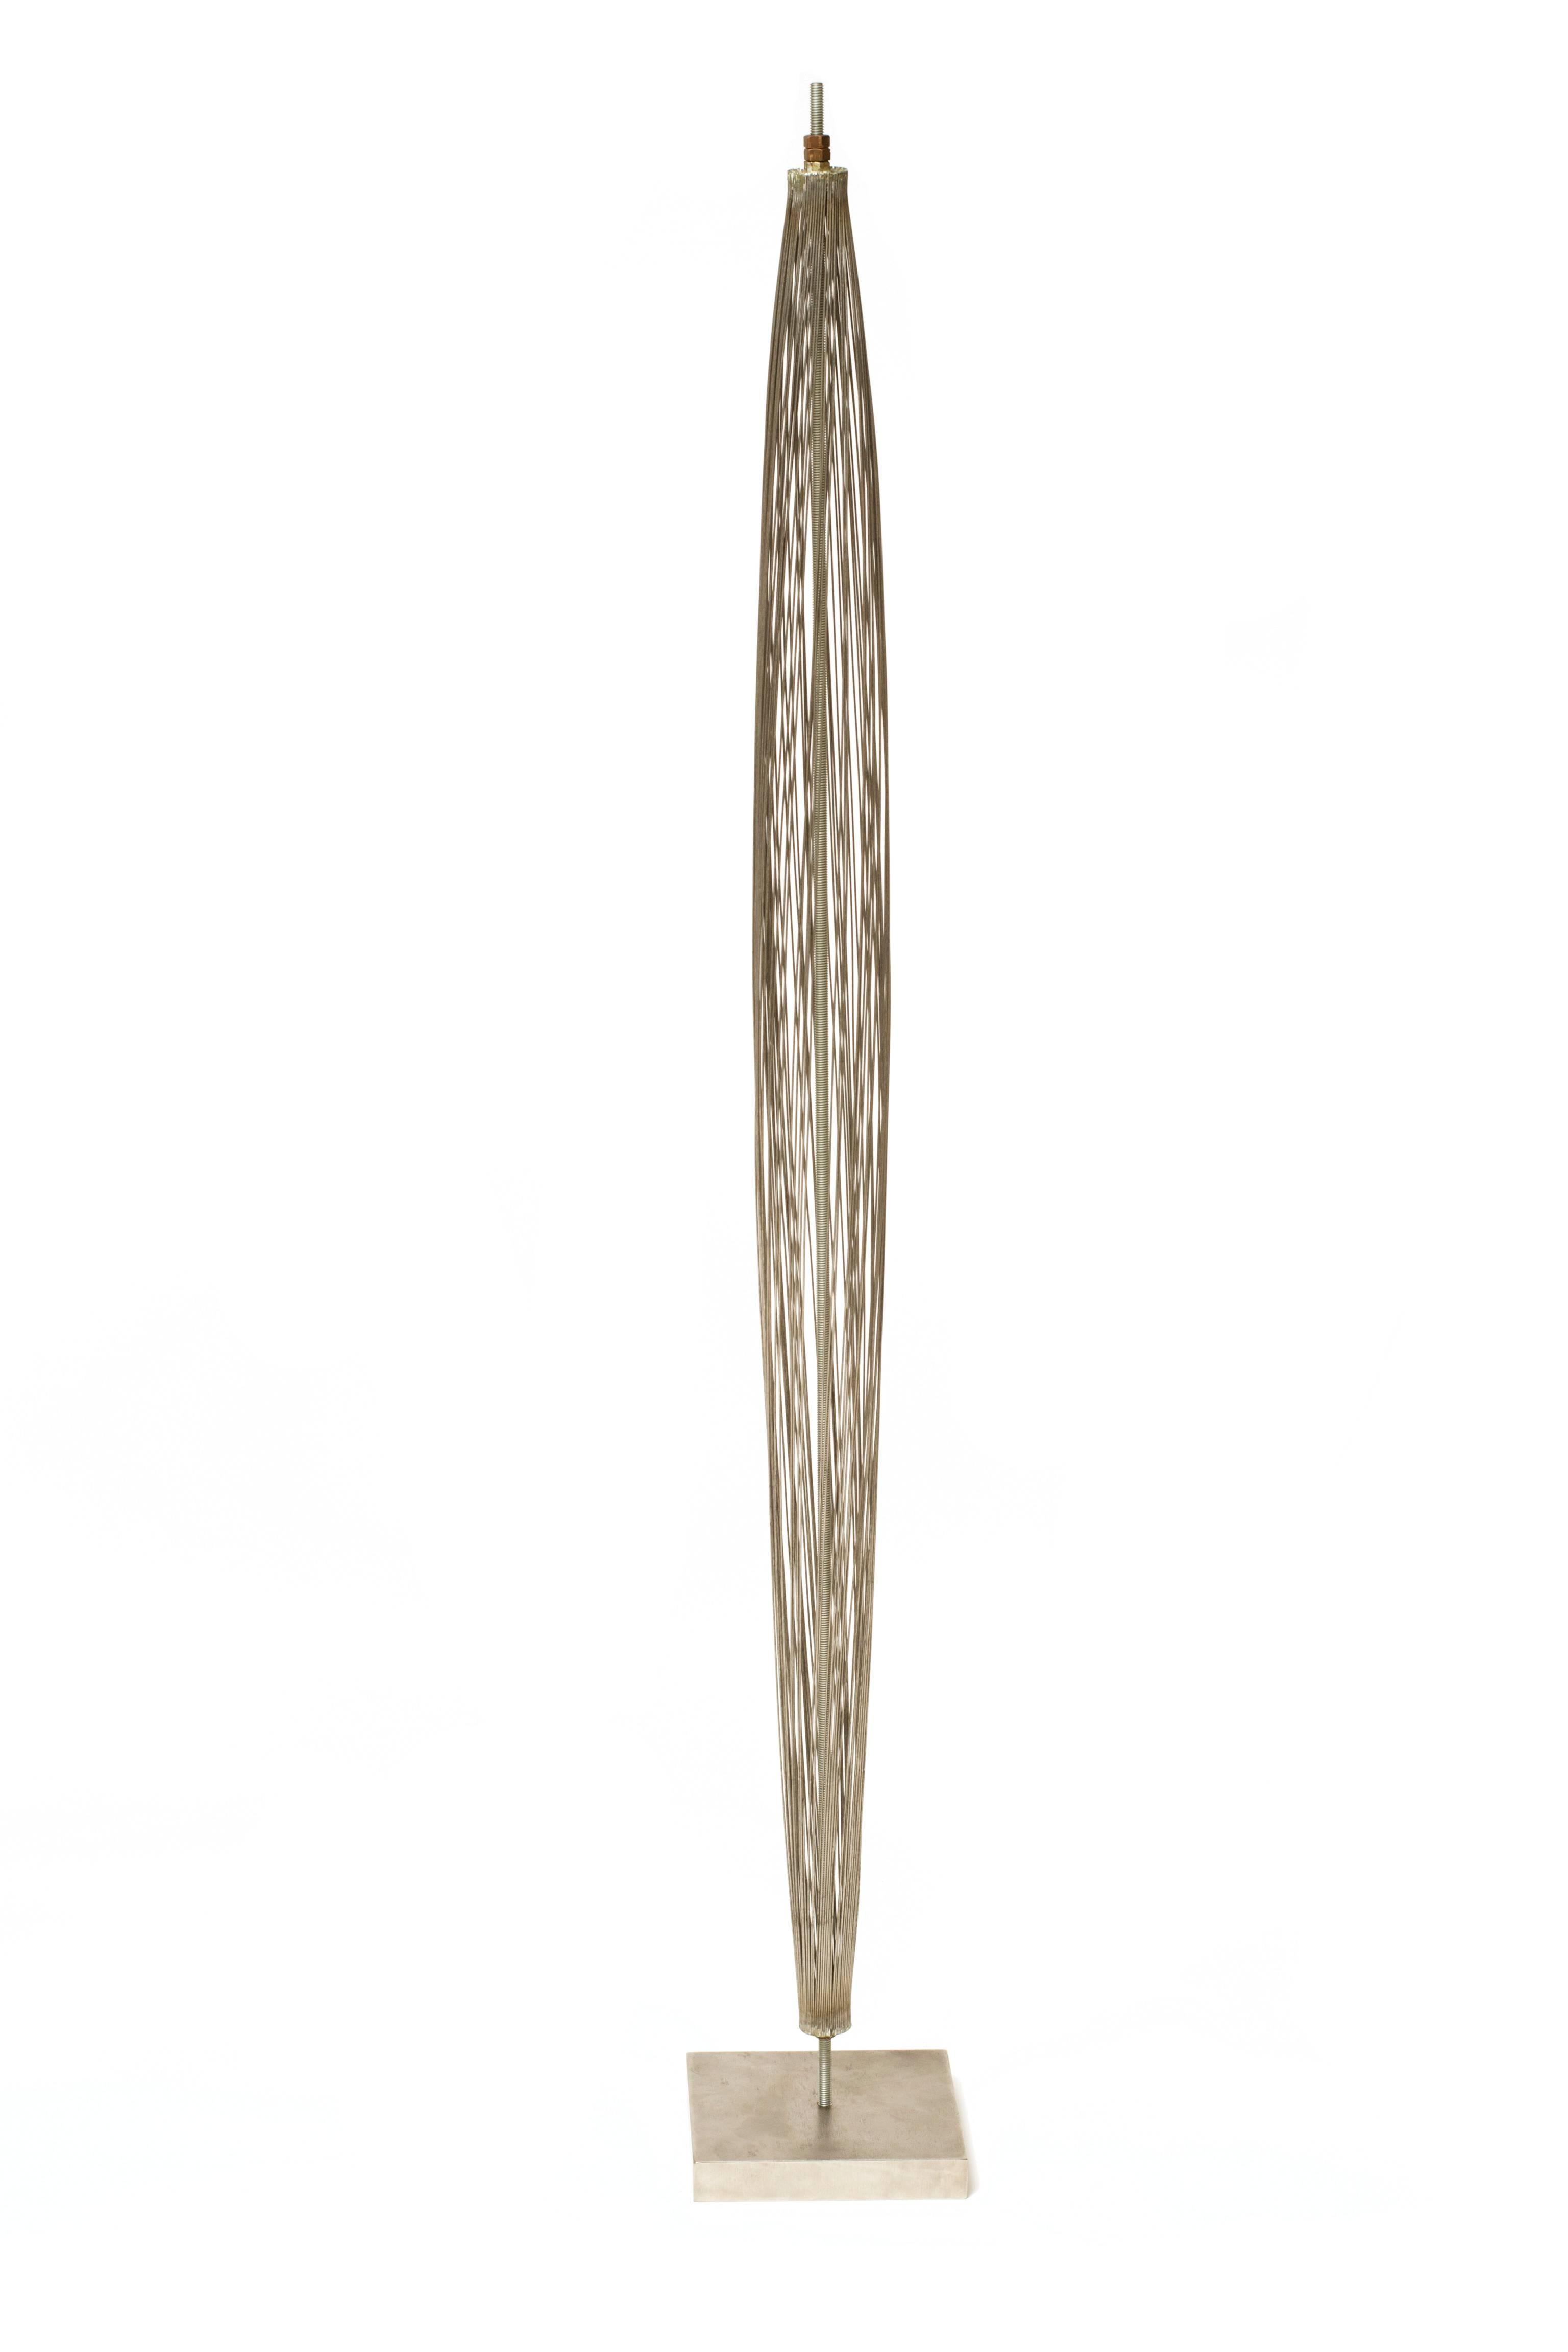 This remarkable piece consisting of 68 expandable stainless wires offers a glimpse into the genius of Harry Bertoia’s design process. This early design wire form sculpture, made by Harry Bertoia in the 1950s, would be refined years later as the